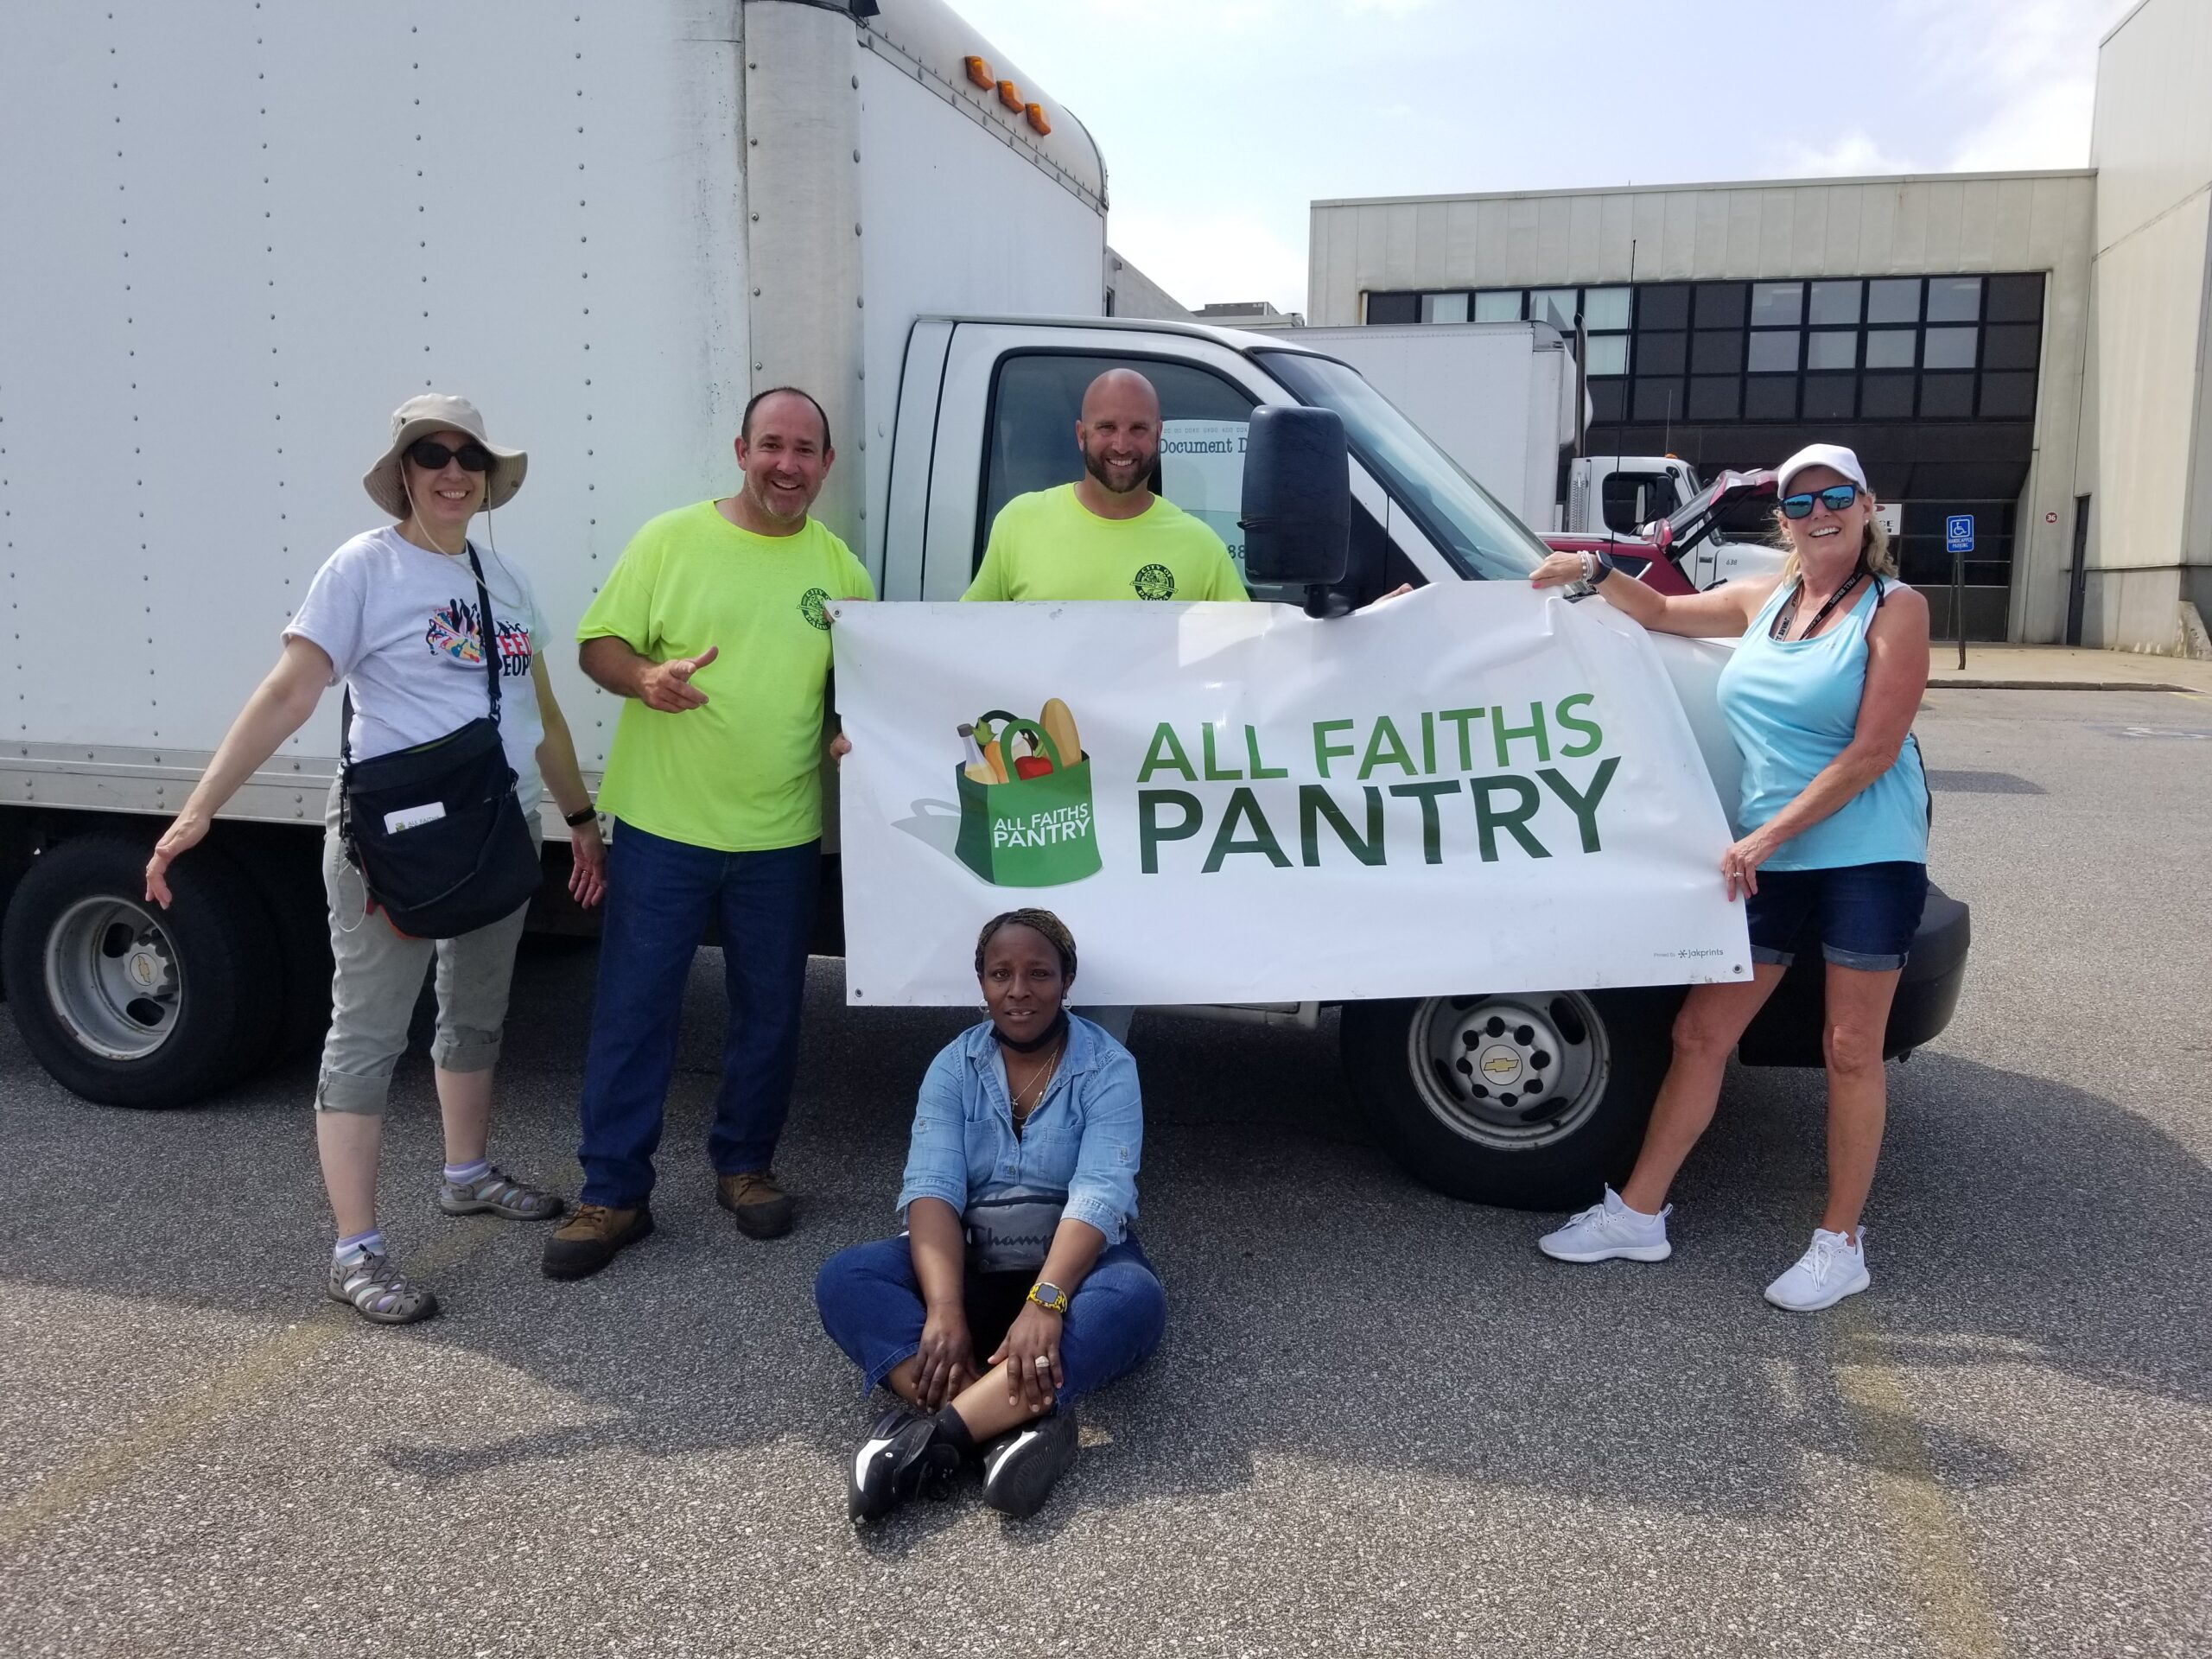 Four people stand and hold an All Faiths Pantry banner in front of a large truck. One woman sits in front on the ground. They are in an industrial parking lot.